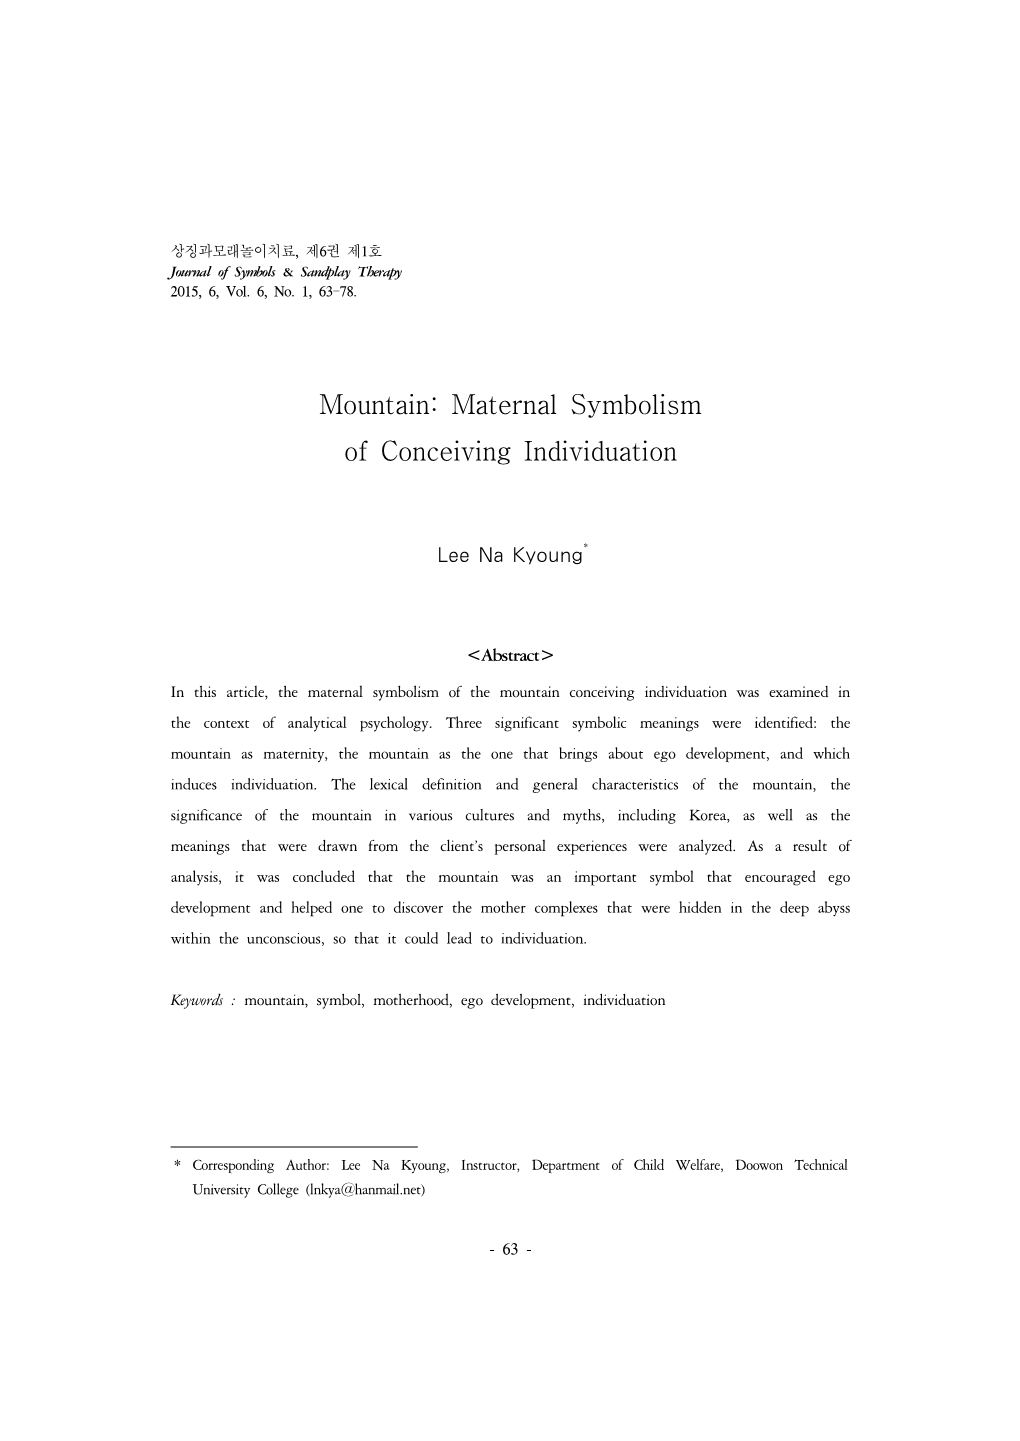 Maternal Symbolism of Conceiving Individuation